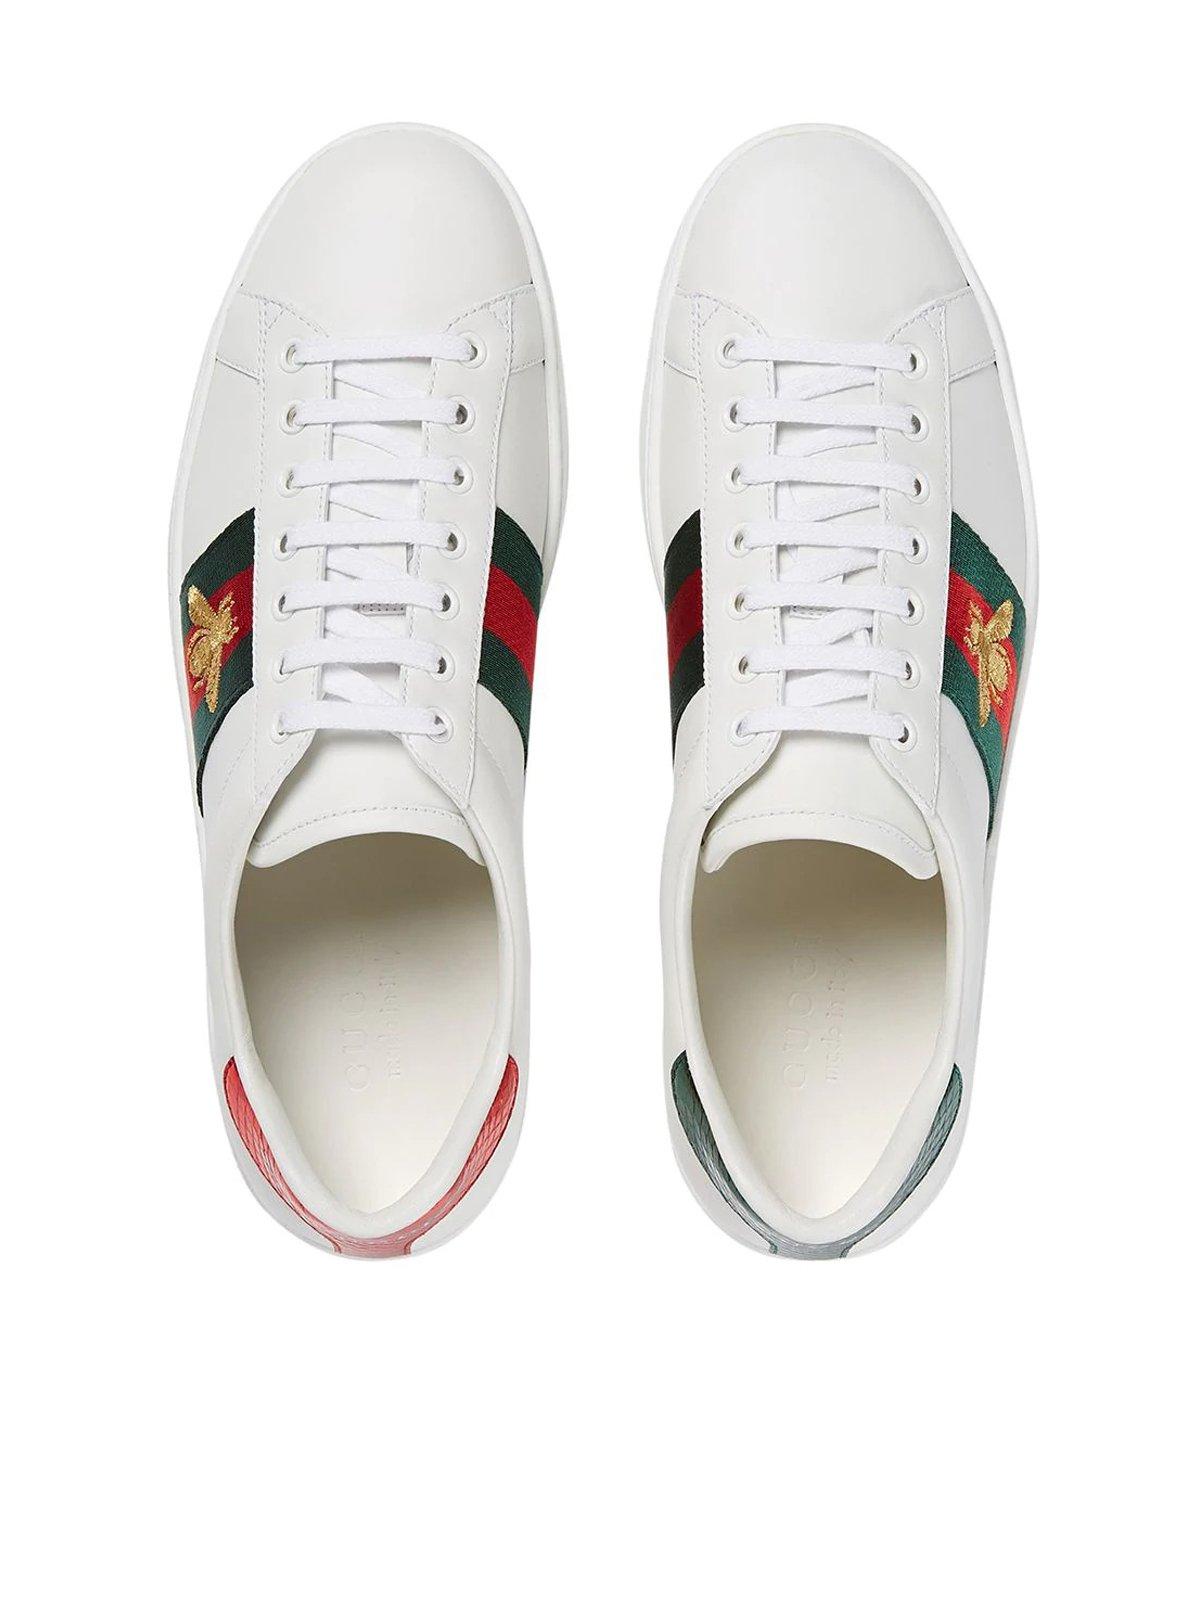 Gucci Leather Ace Bee Embroidered Sneakers for Men - Save 18% - Lyst